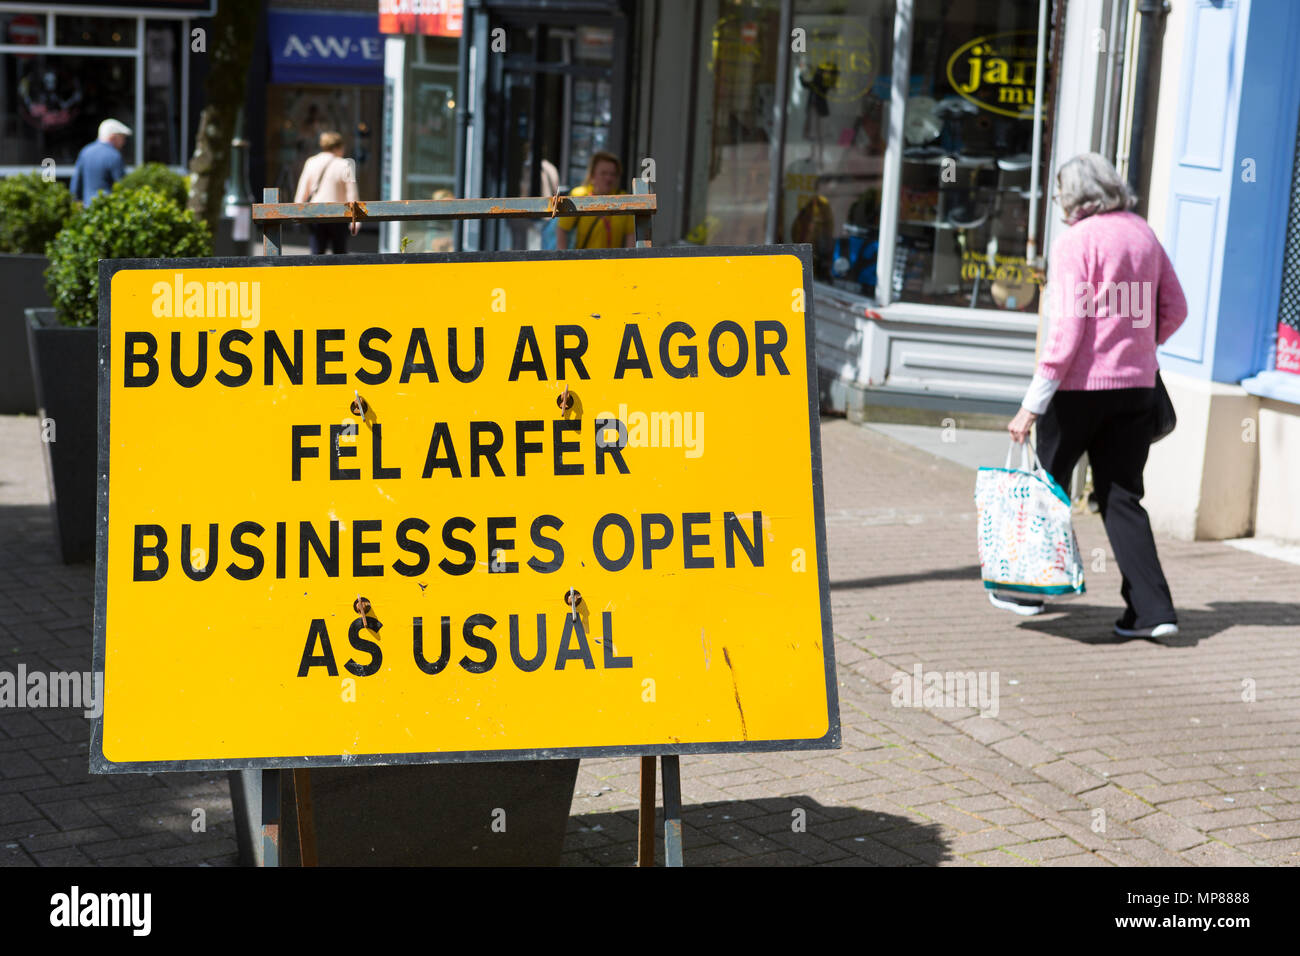 Sign in town centre saying businesses open as usual Stock Photo